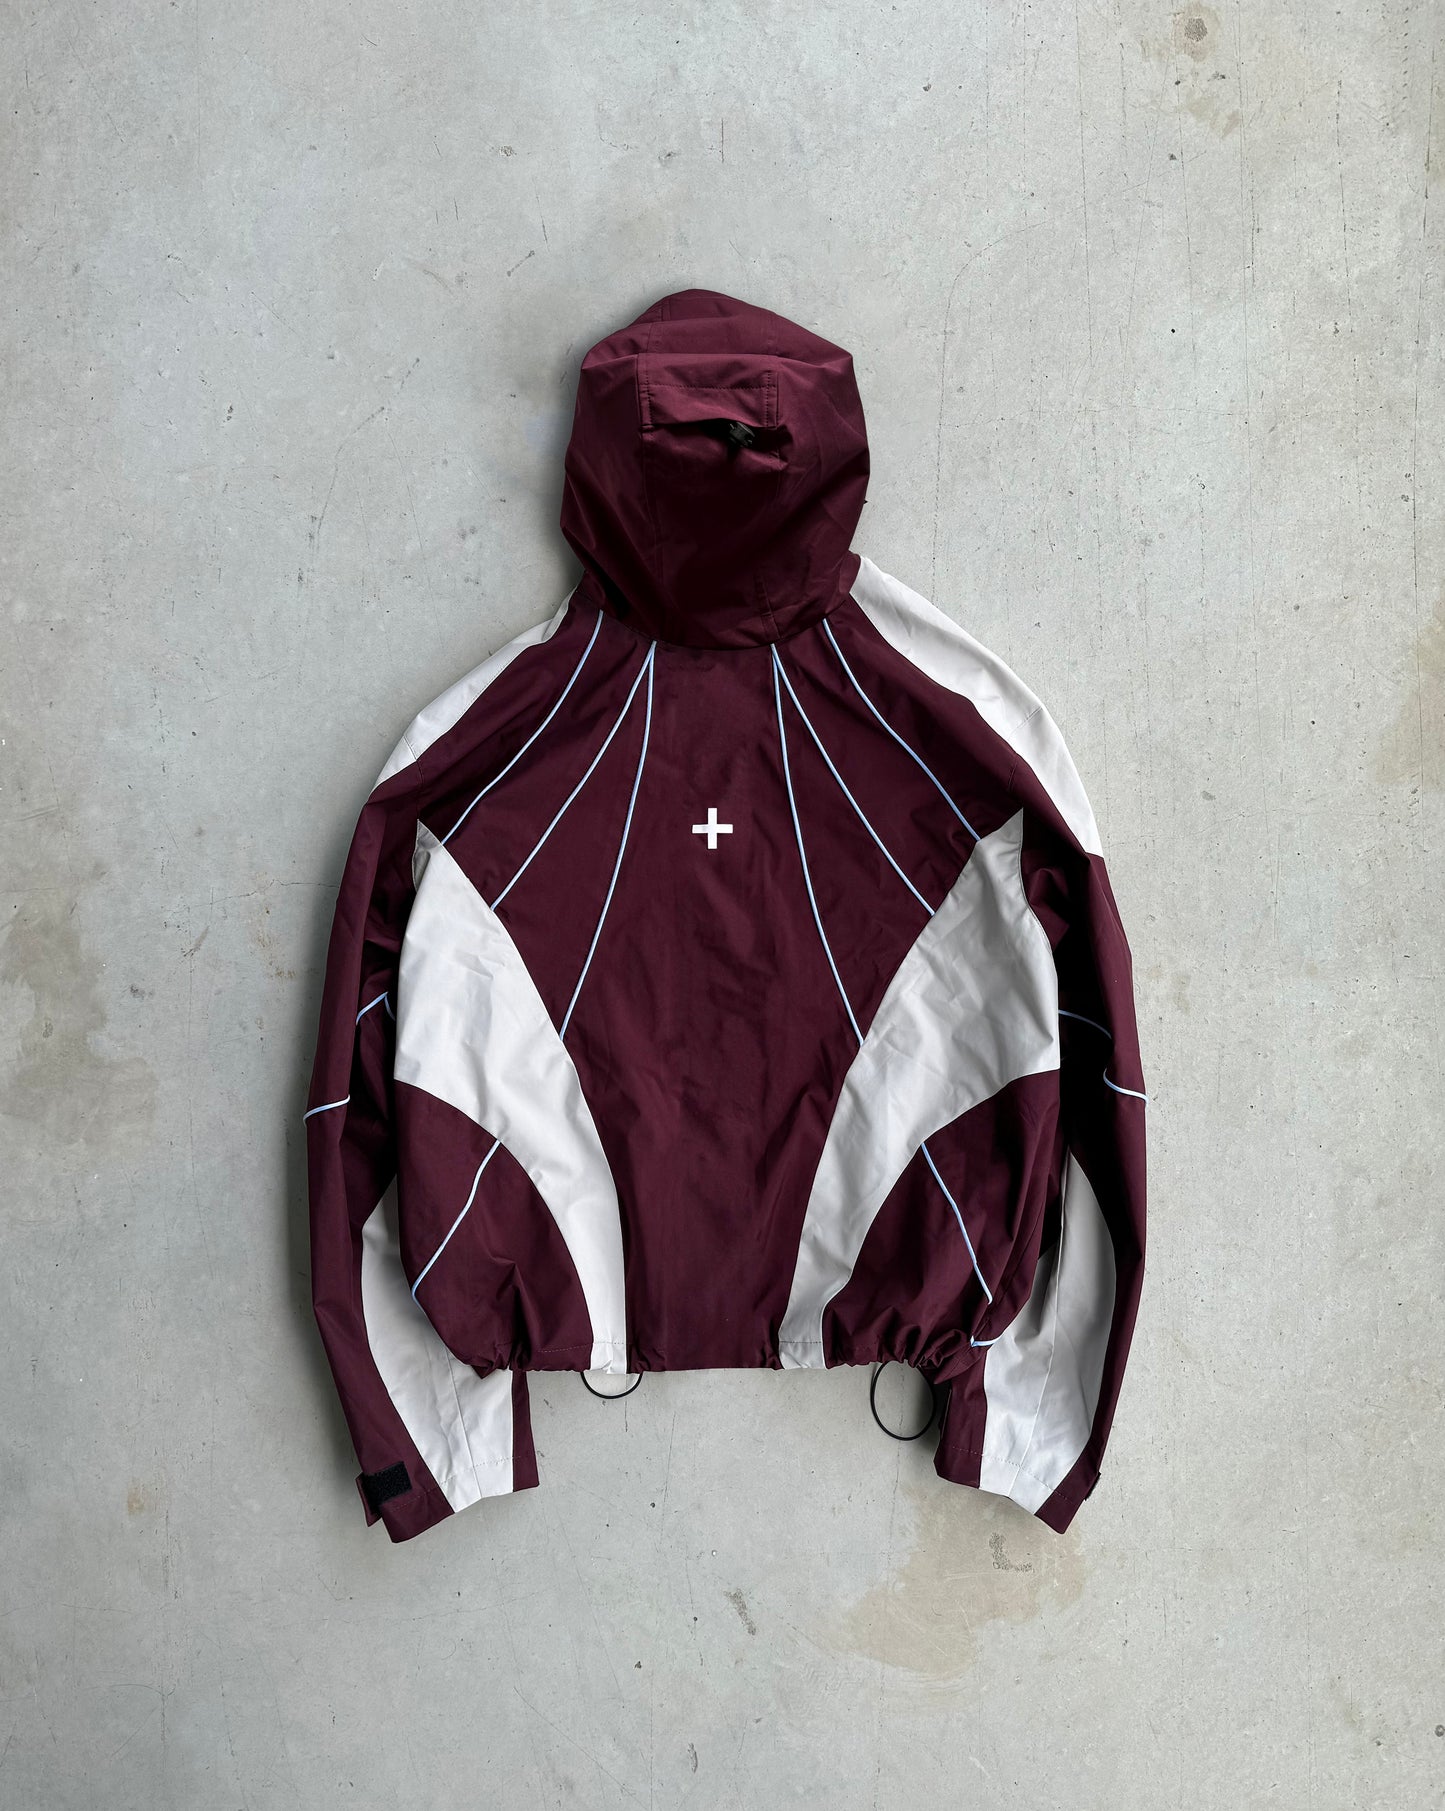 04. Ventus Shell Jacket - Limited Pre Order